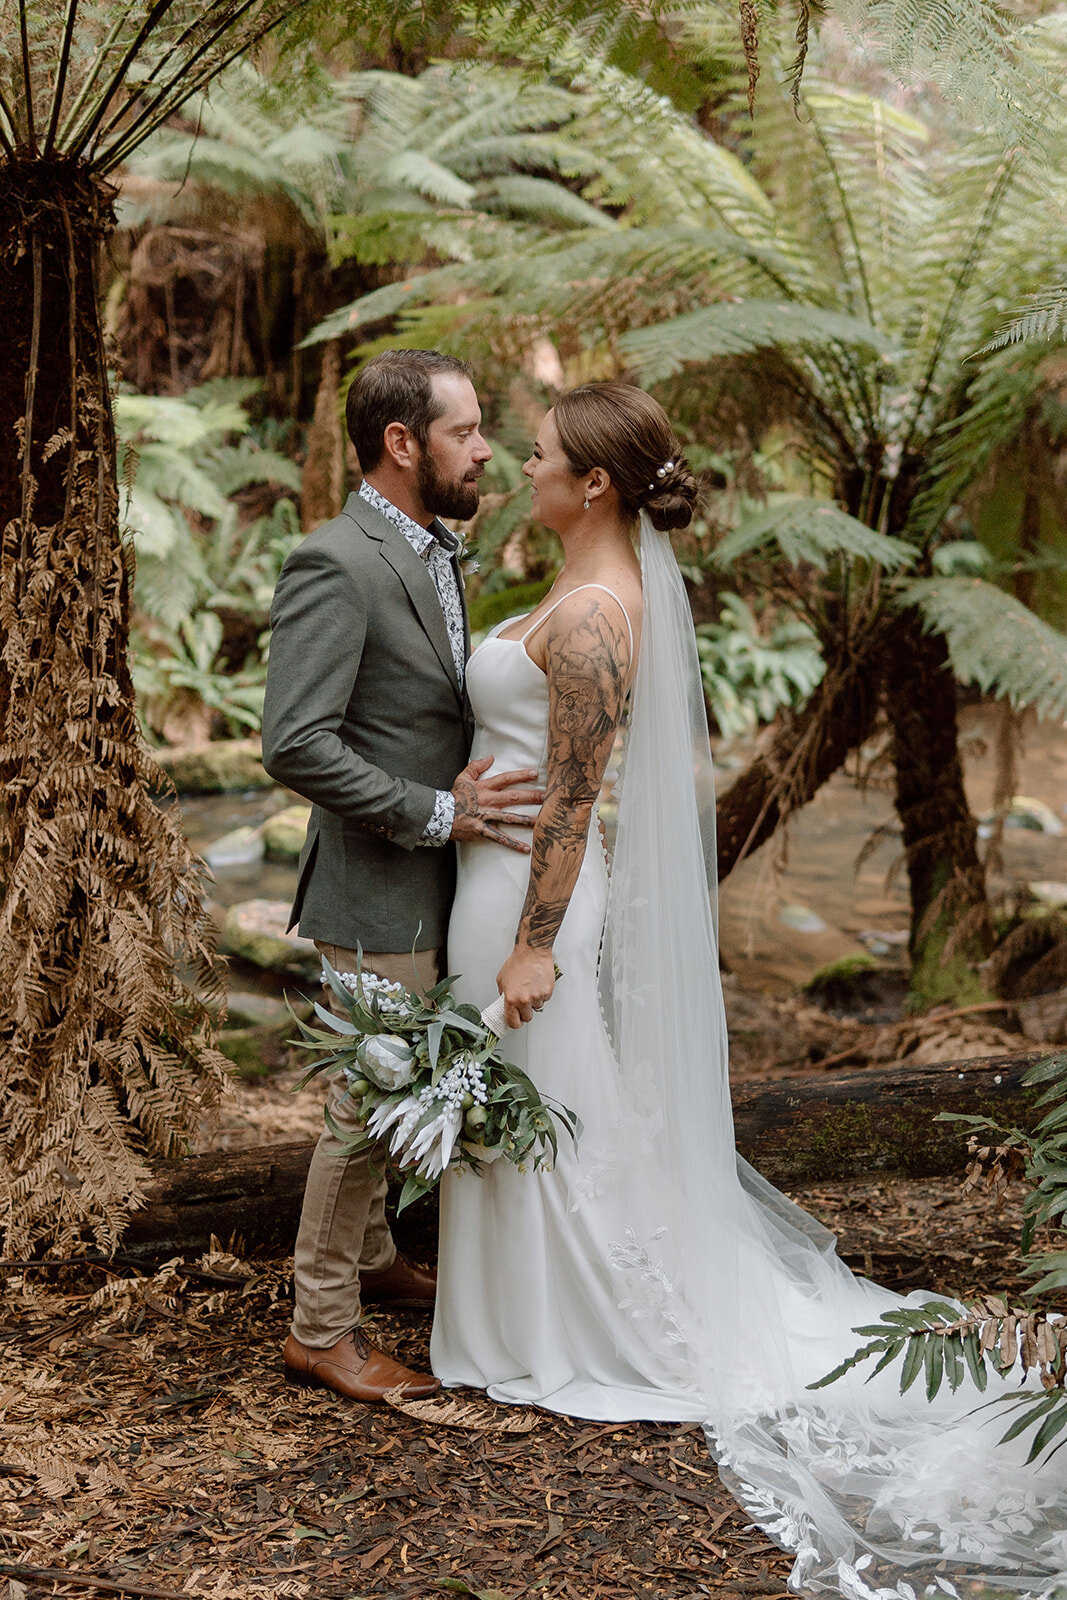 Stacey&Cory-Coast&Pines-224